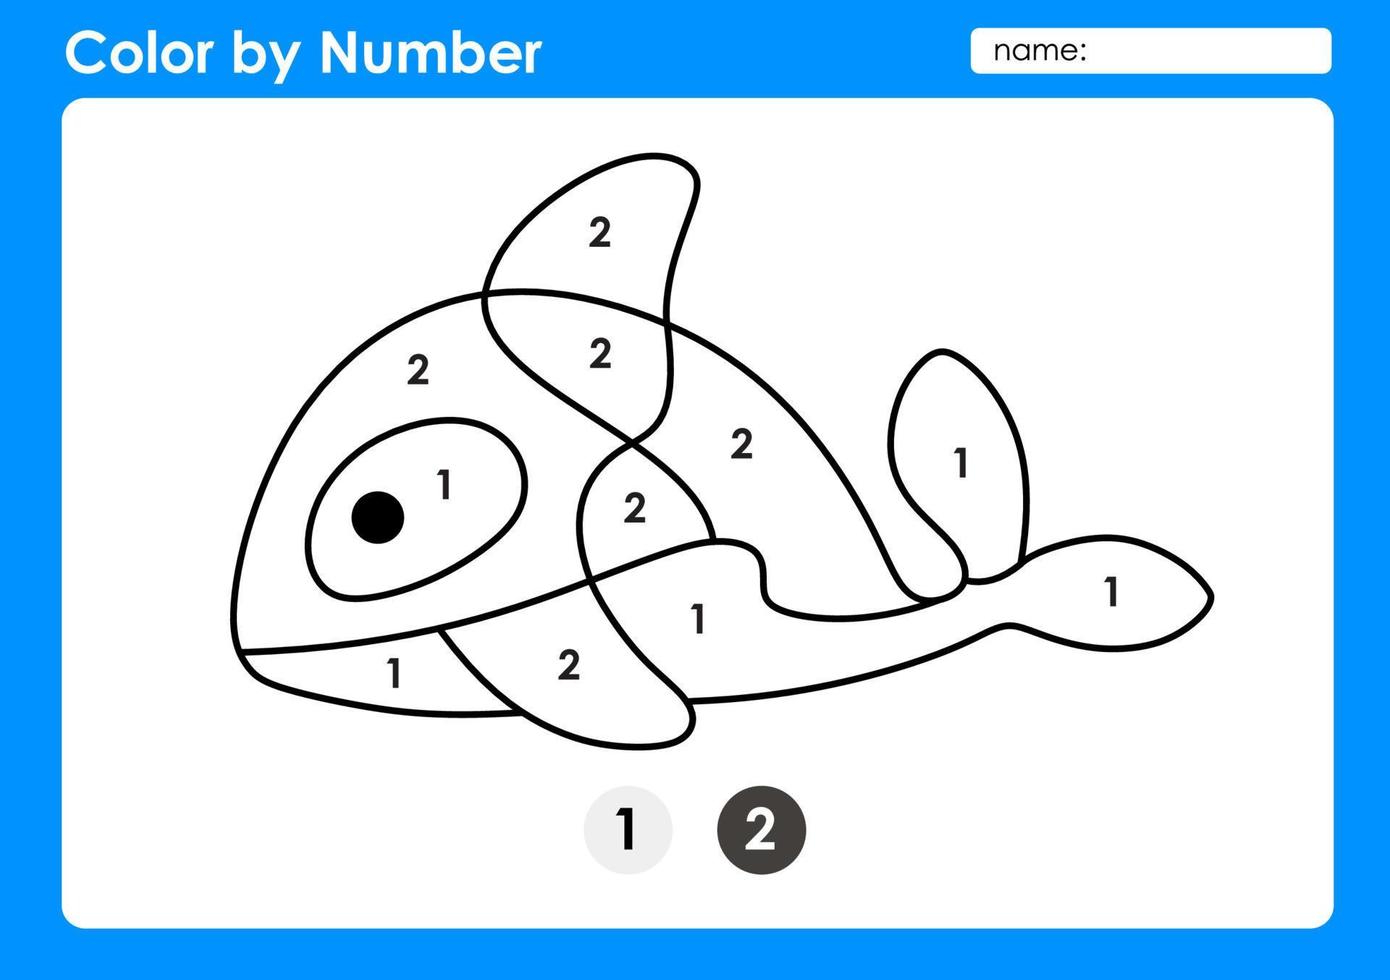 Color by number worksheet for kids learning numbers by coloring Killer Whale vector